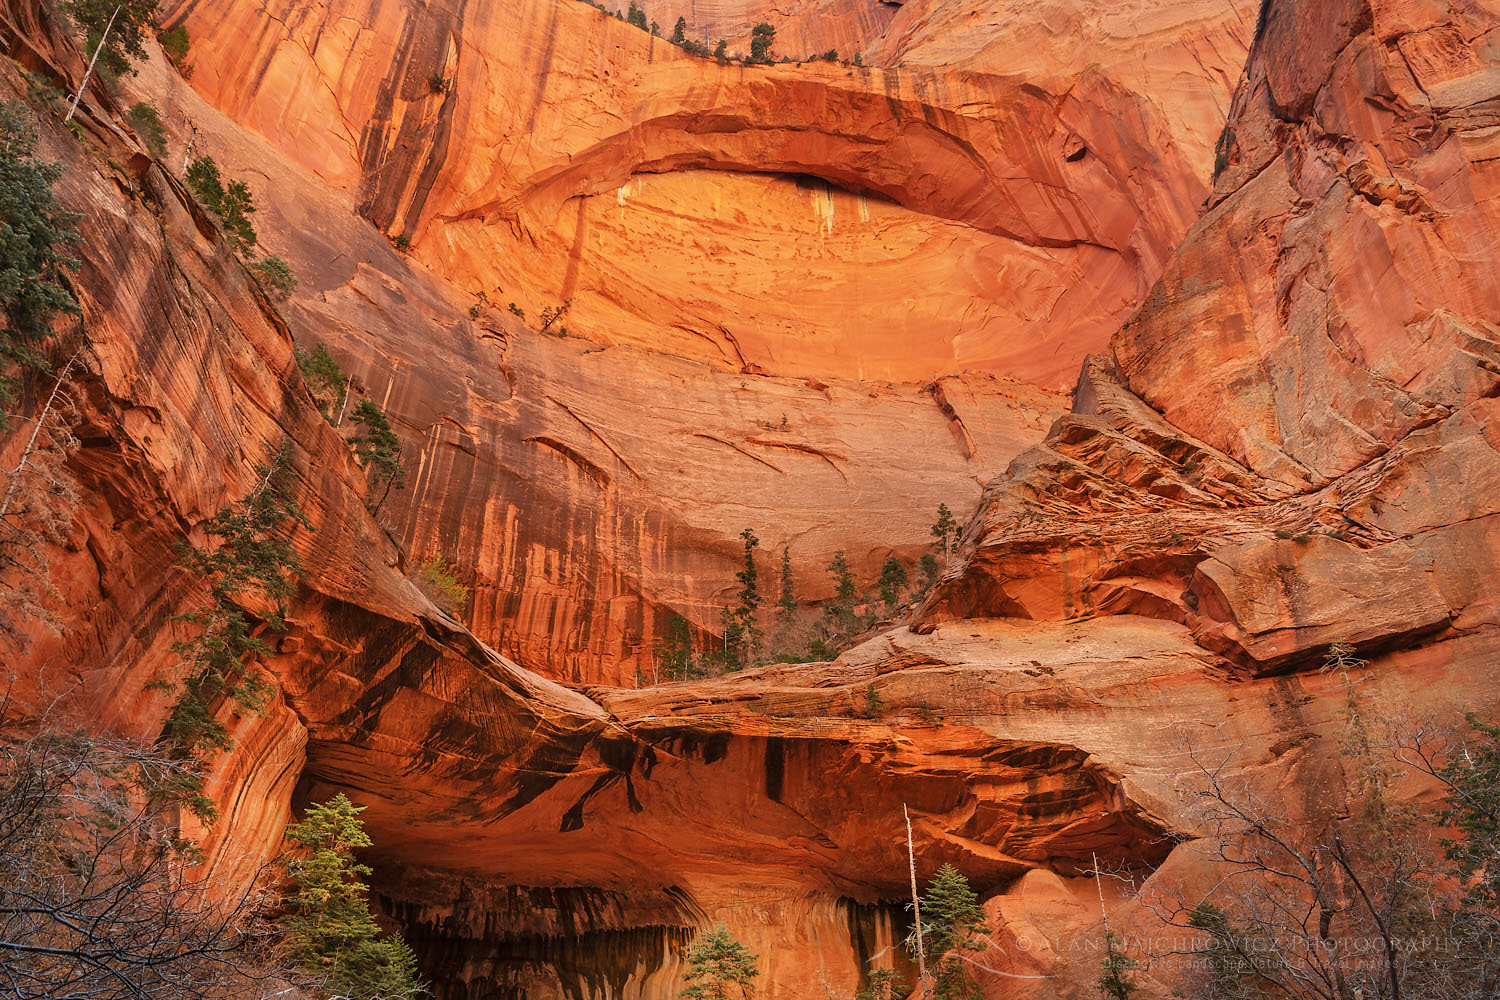 Double Arch Alcove on Taylor Creek, Kolob Canyons Section of Zion National Park Utah #77136